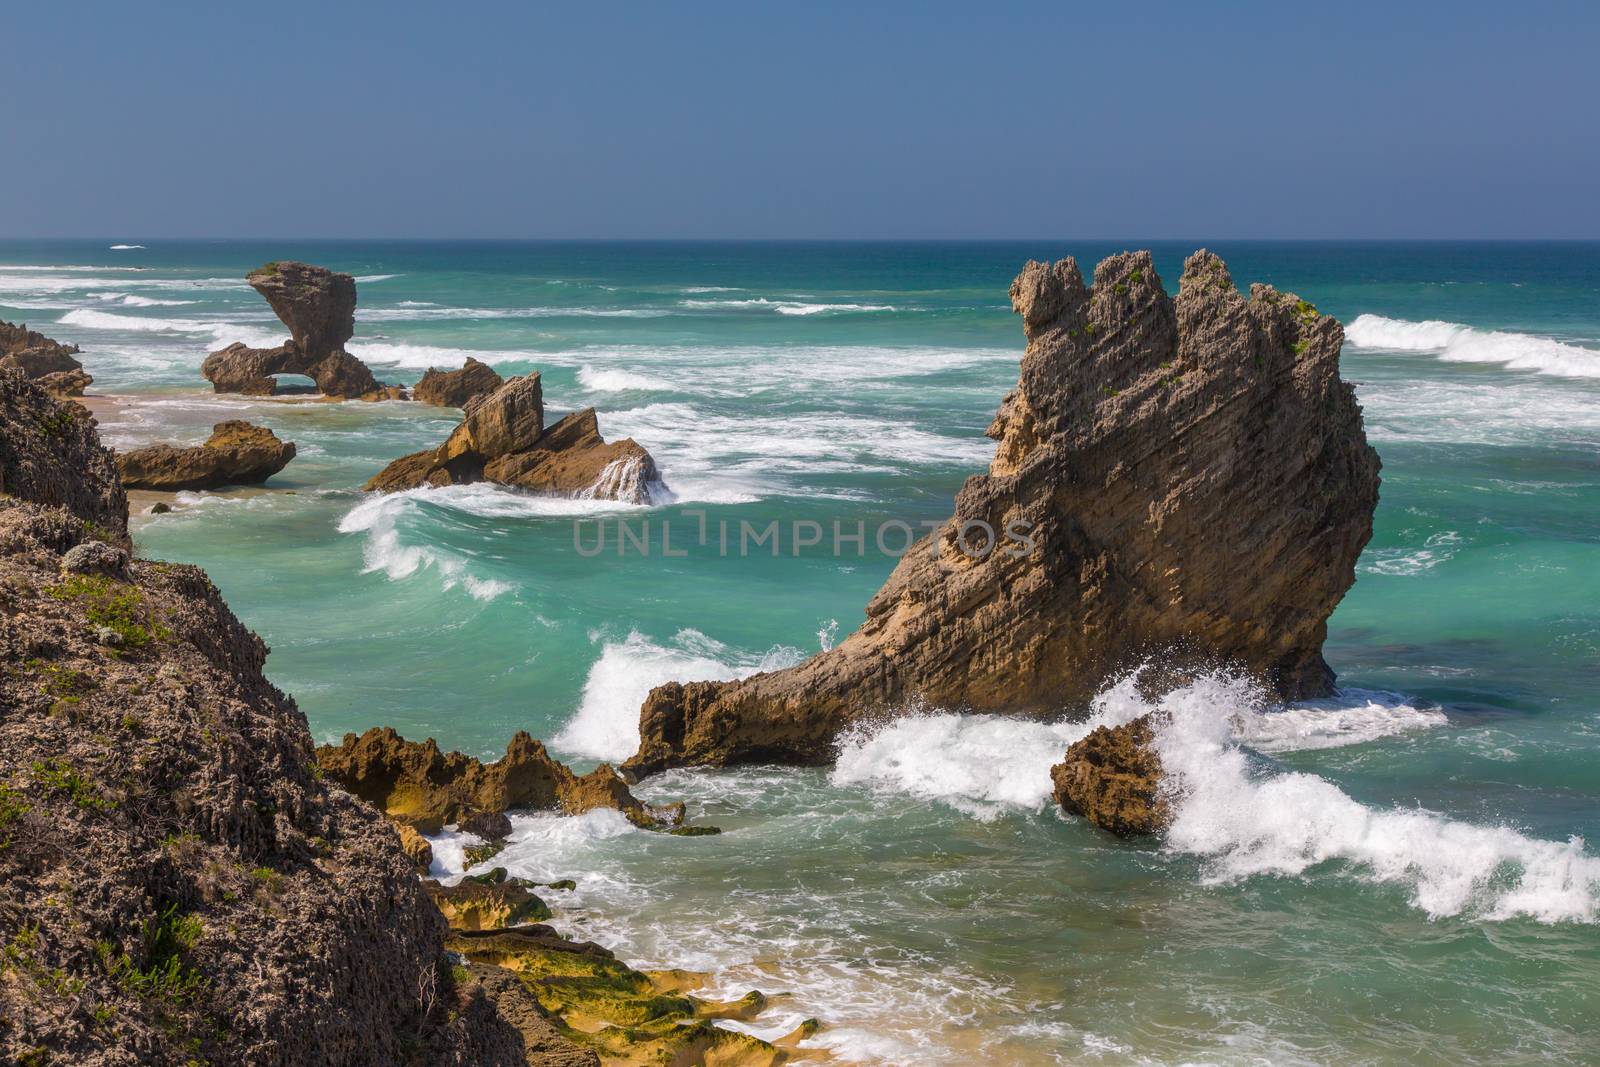 Coastline Rock Formations in South Africa by fouroaks